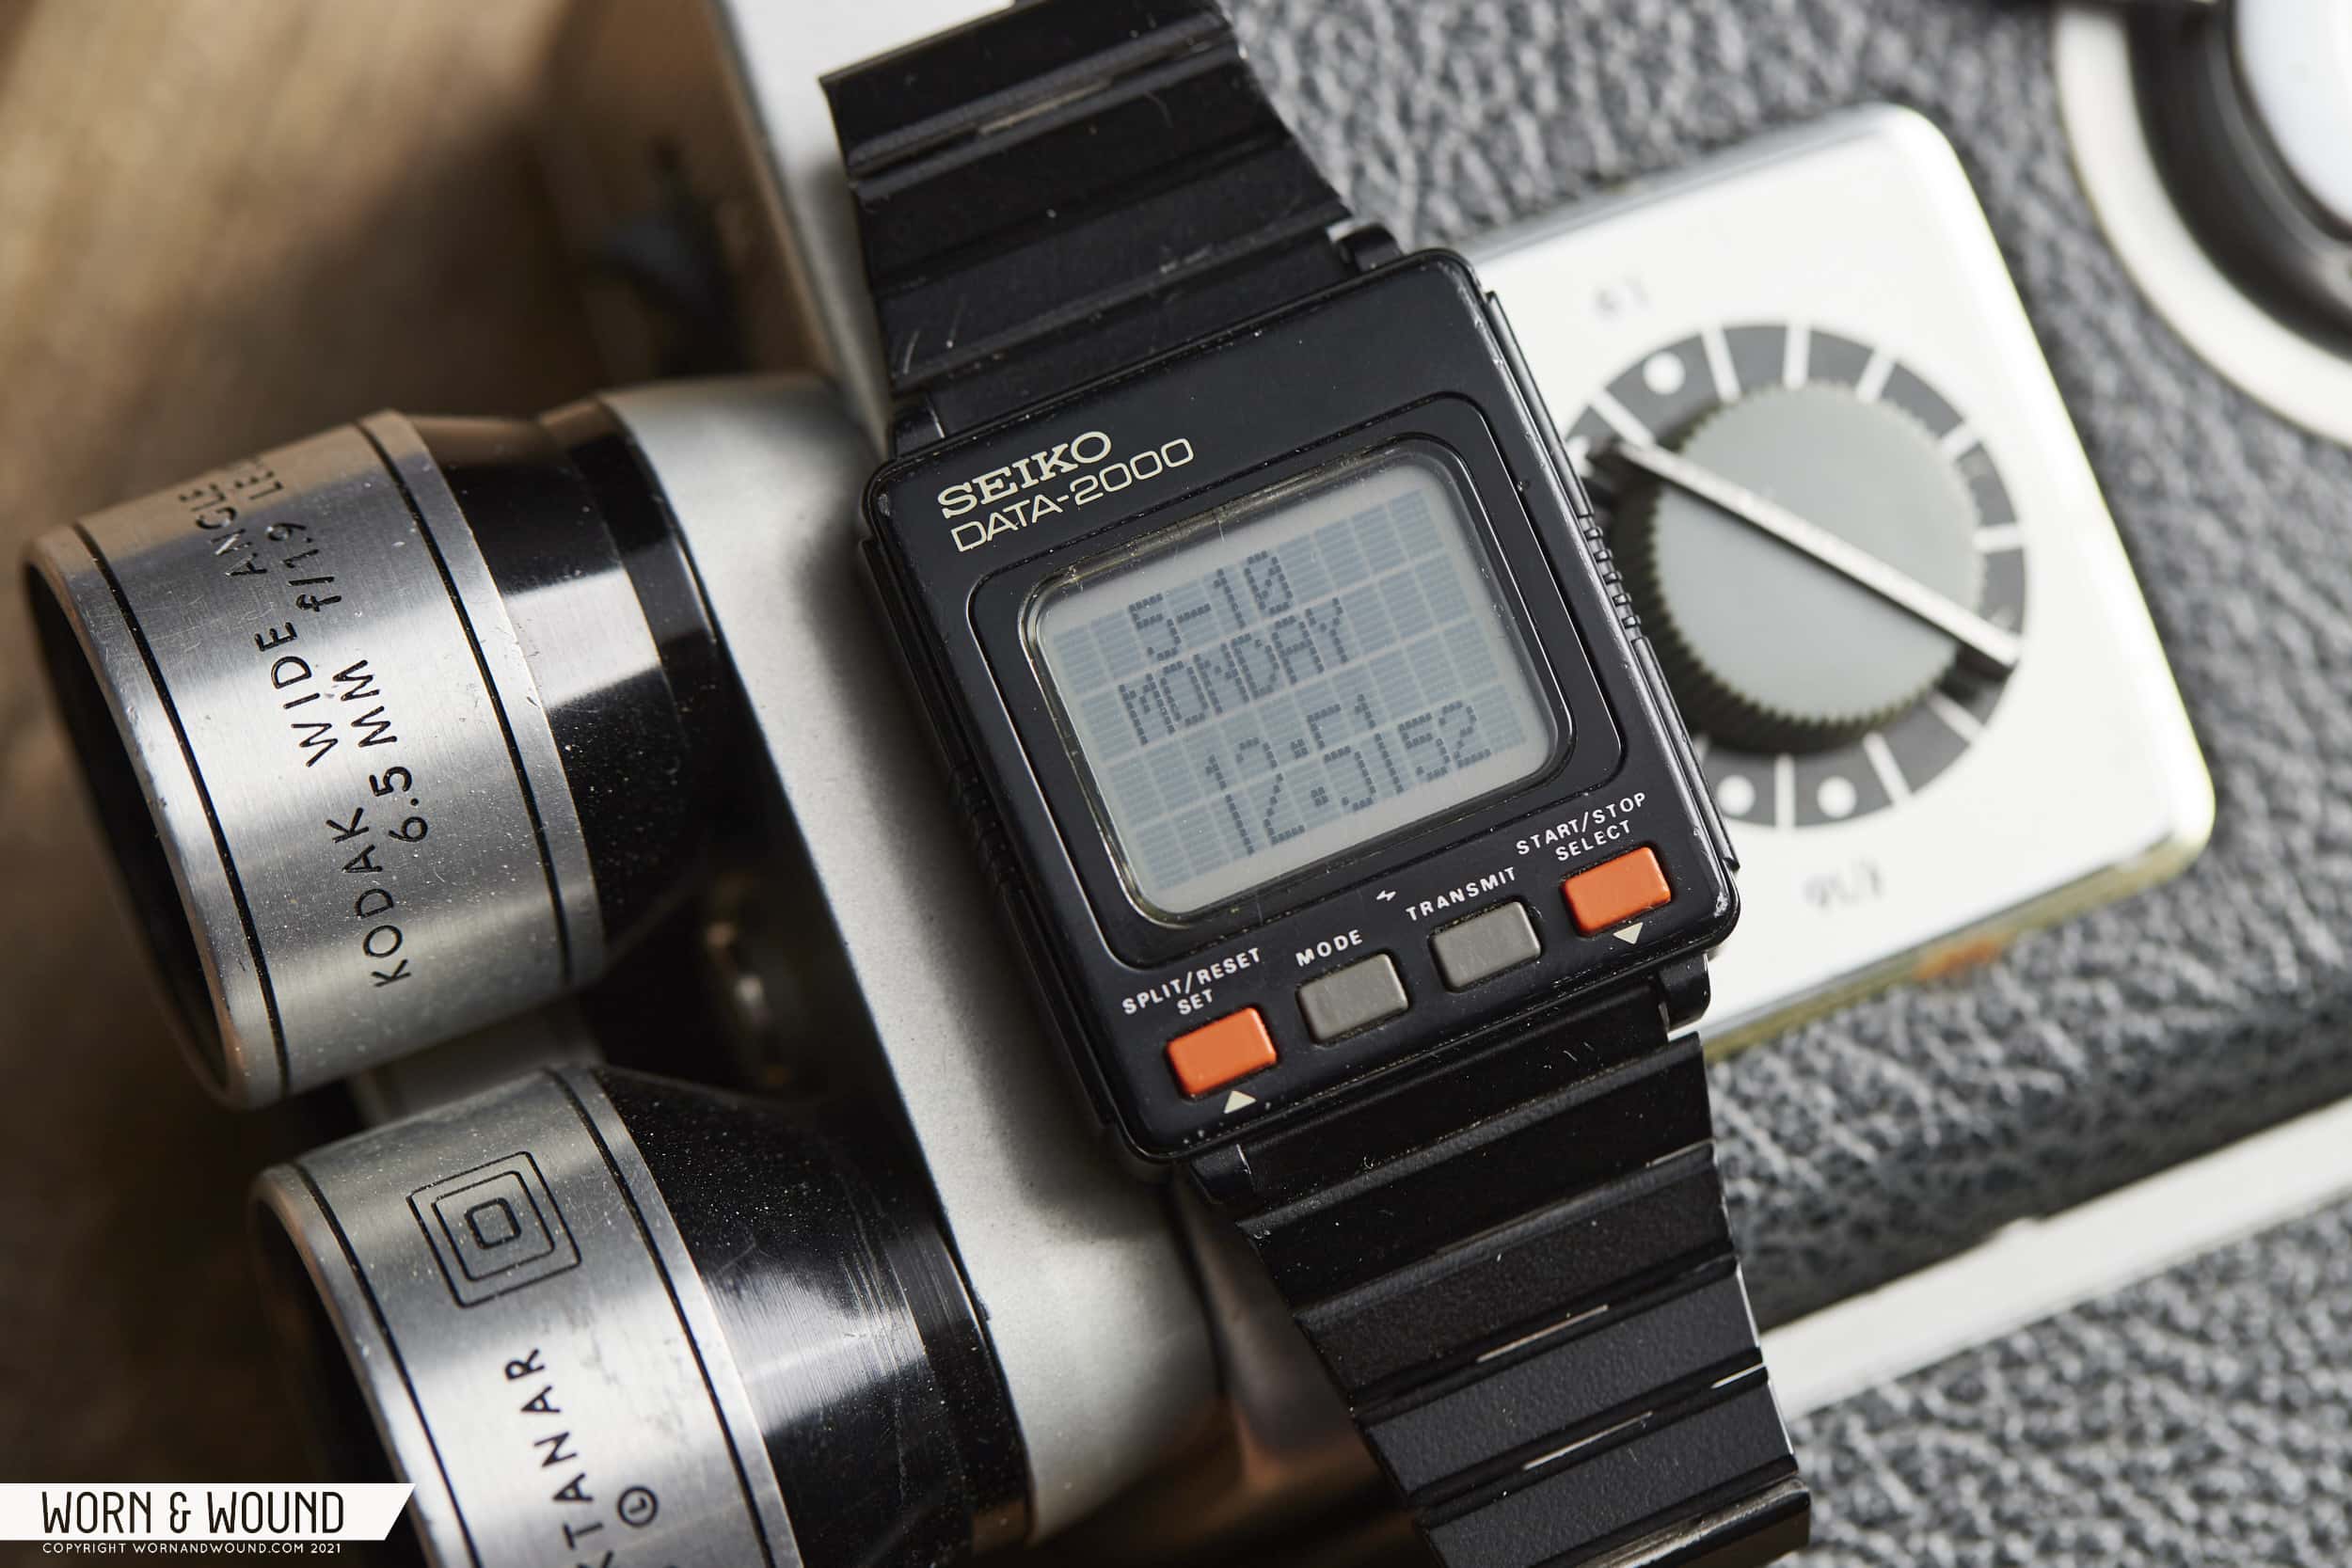 From Deep in the Watch Box: The Seiko Data 2000 - Worn & Wound